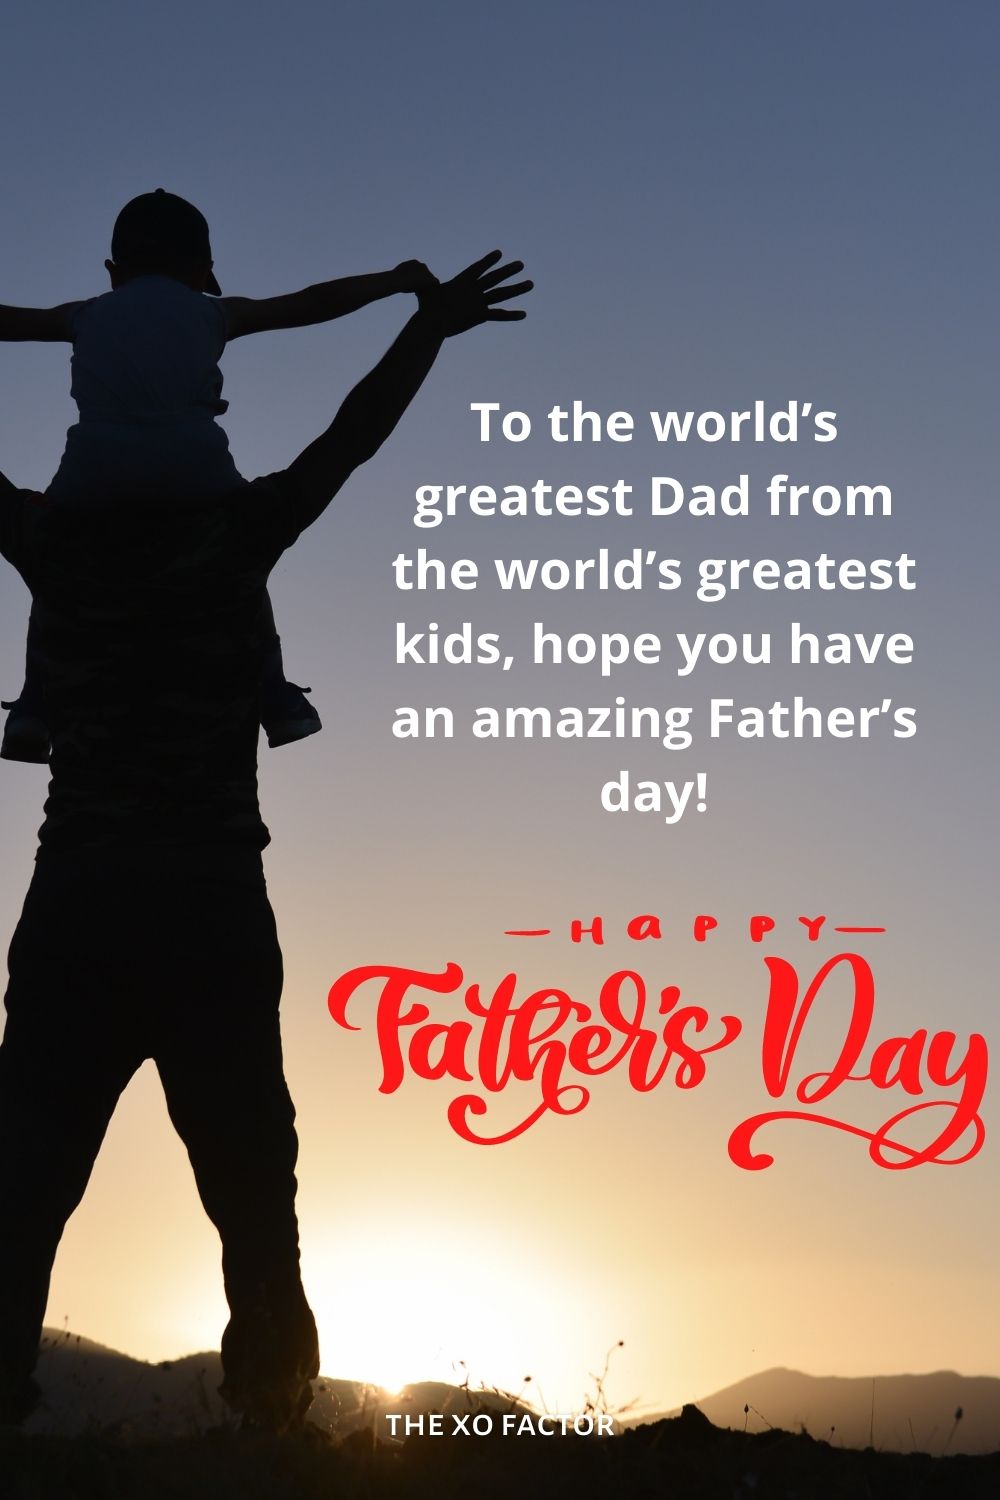 To the world’s greatest Dad from the world’s greatest kids, hope you have an amazing Father’s day!